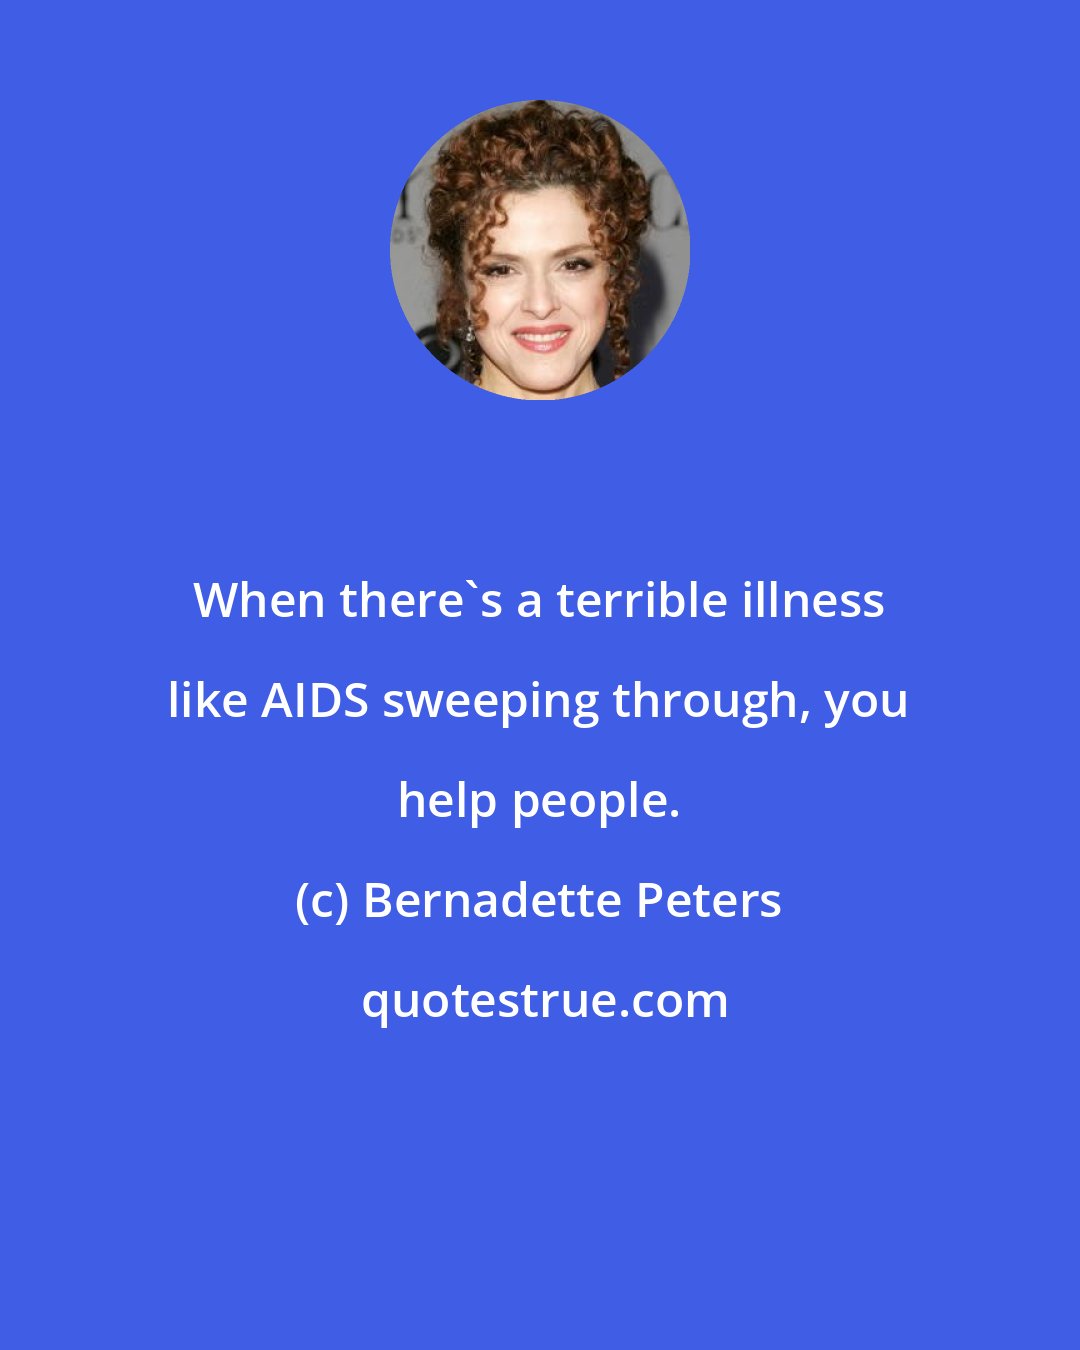 Bernadette Peters: When there's a terrible illness like AIDS sweeping through, you help people.